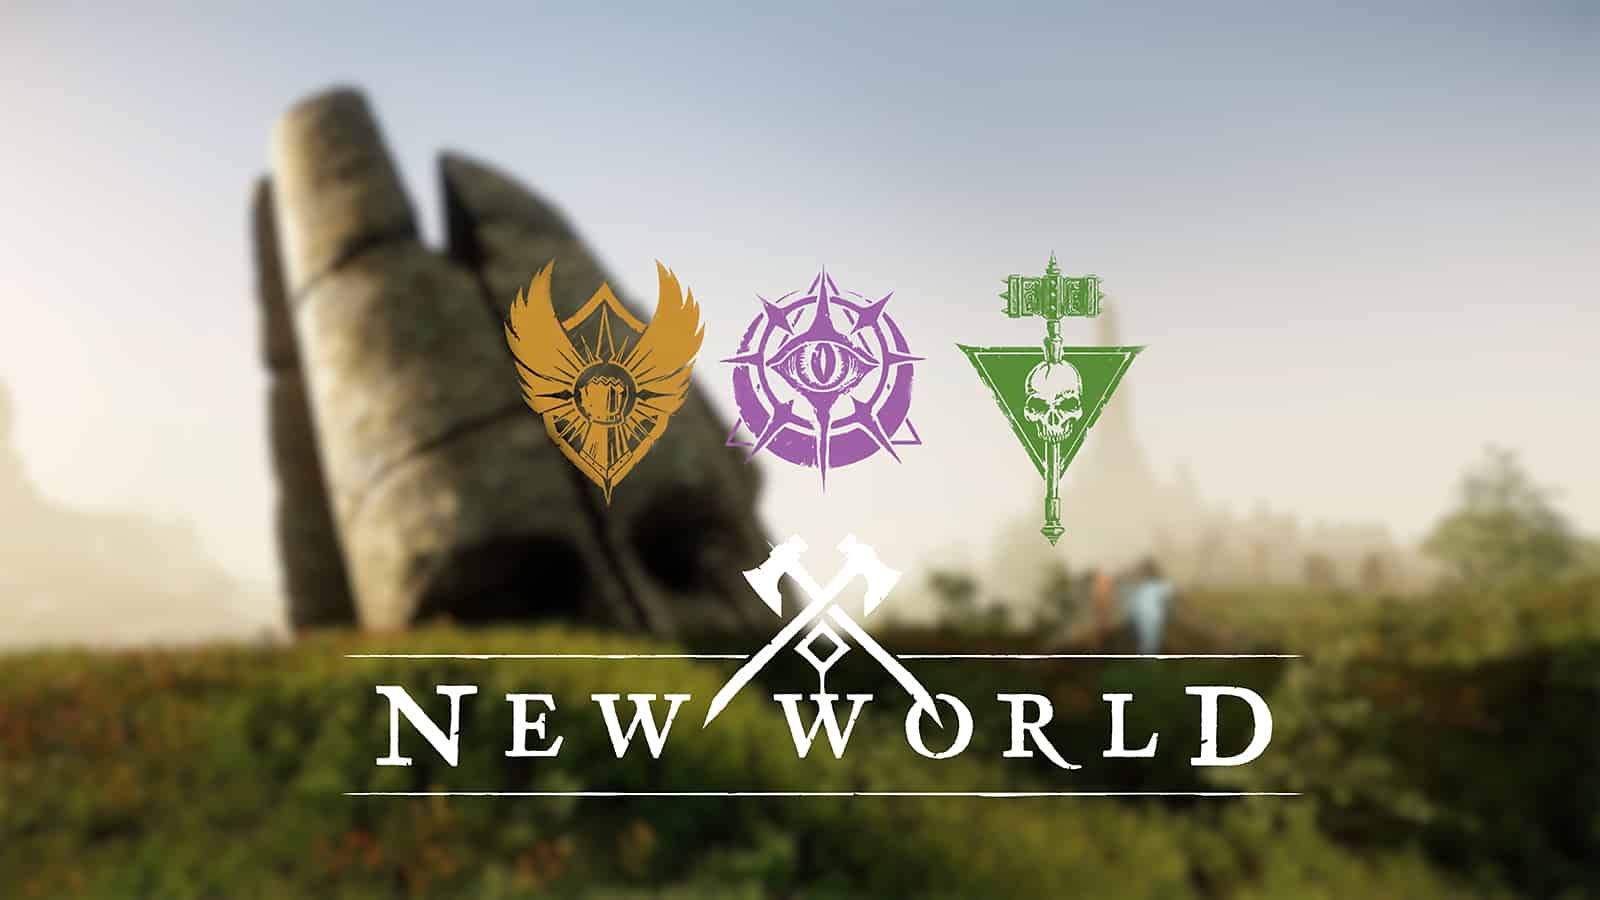 Play New World - Weapons in New World have different strengths and